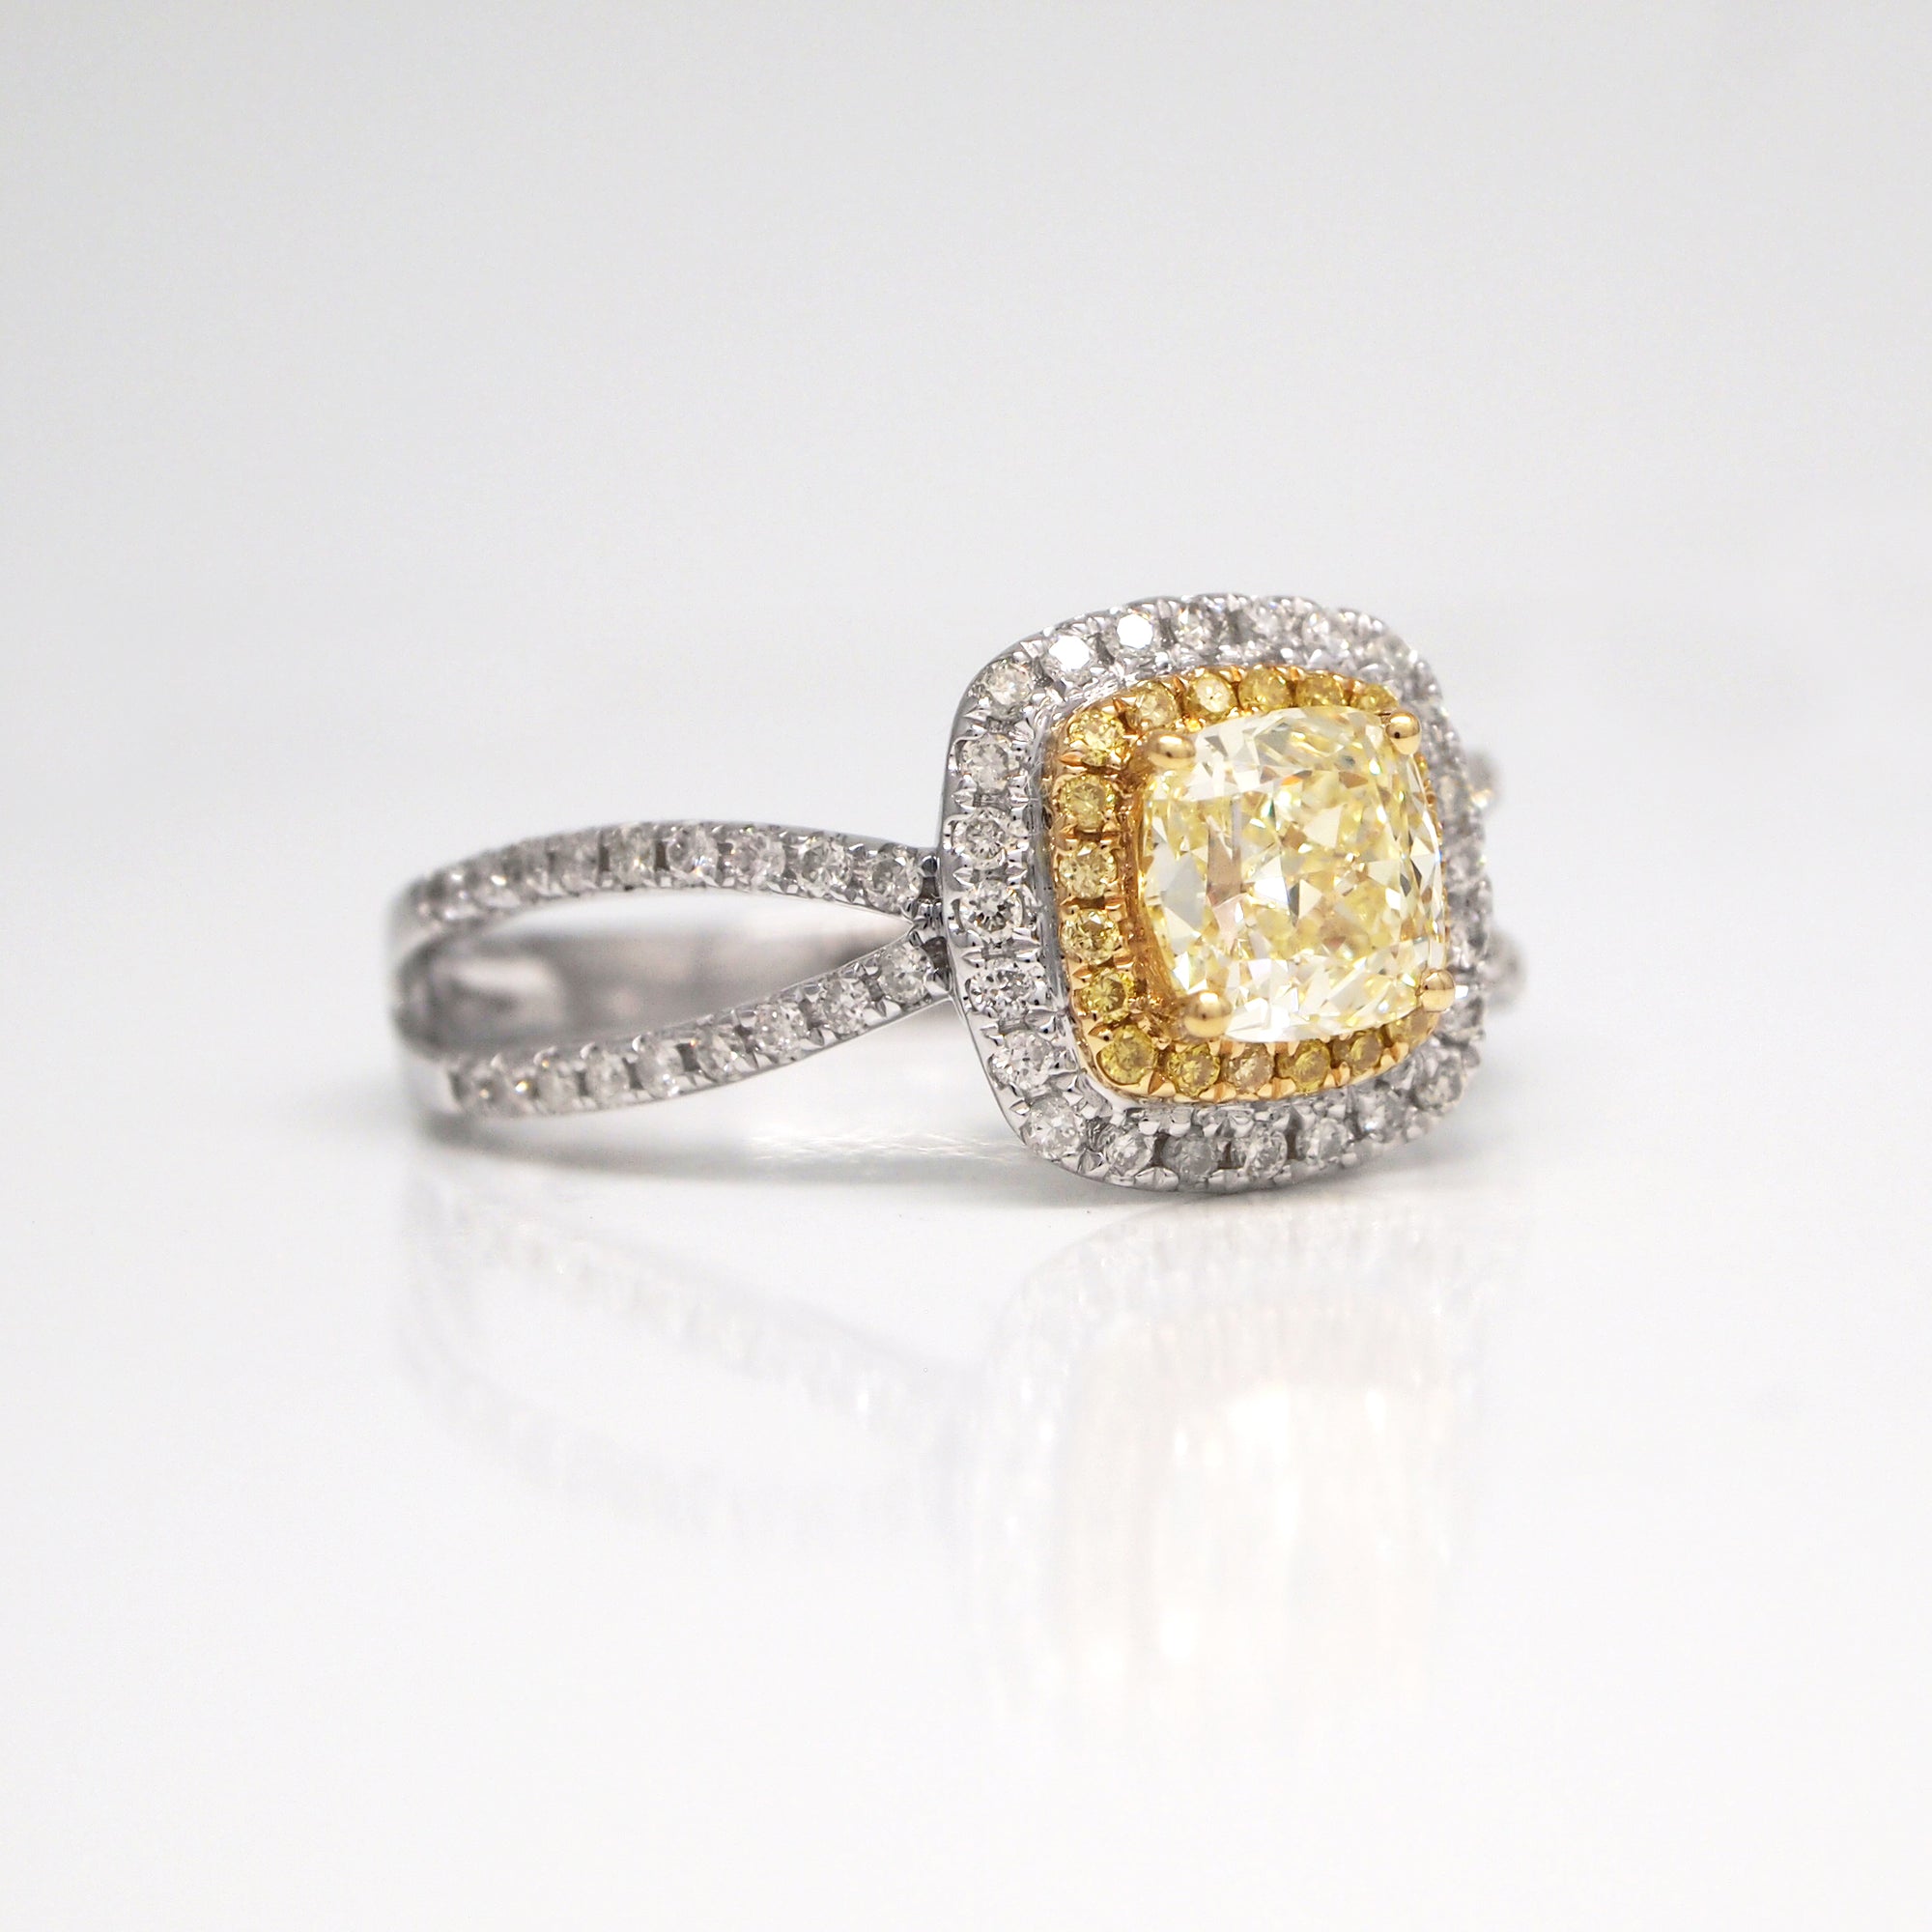 18K white gold split-shank yellow diamond engagement ring with GIA certificate 